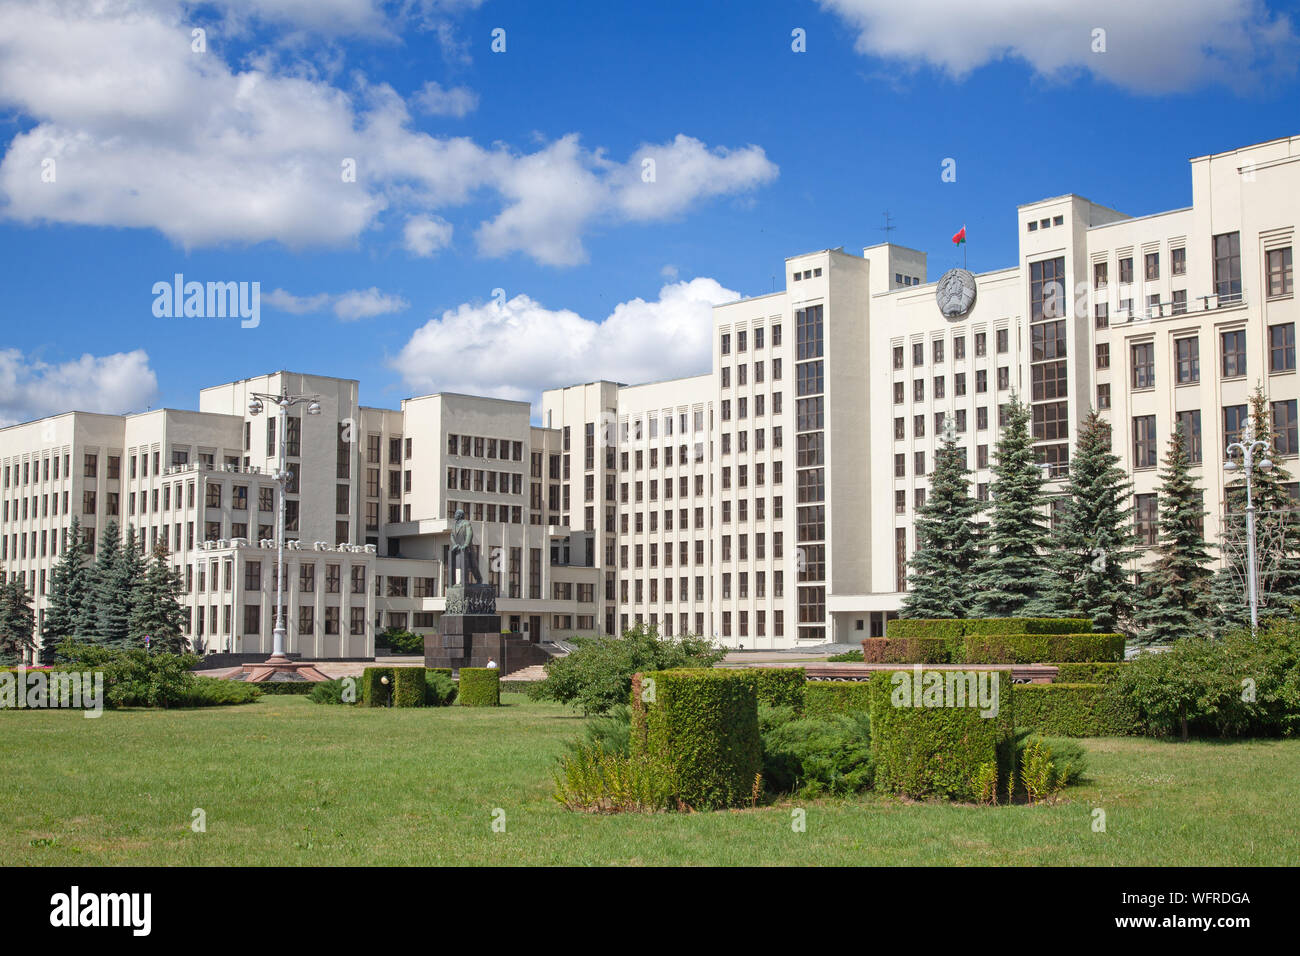 Parliament building on the Independence square in Minsk, Belarus. Building and statue constructed in 1933. Stock Photo